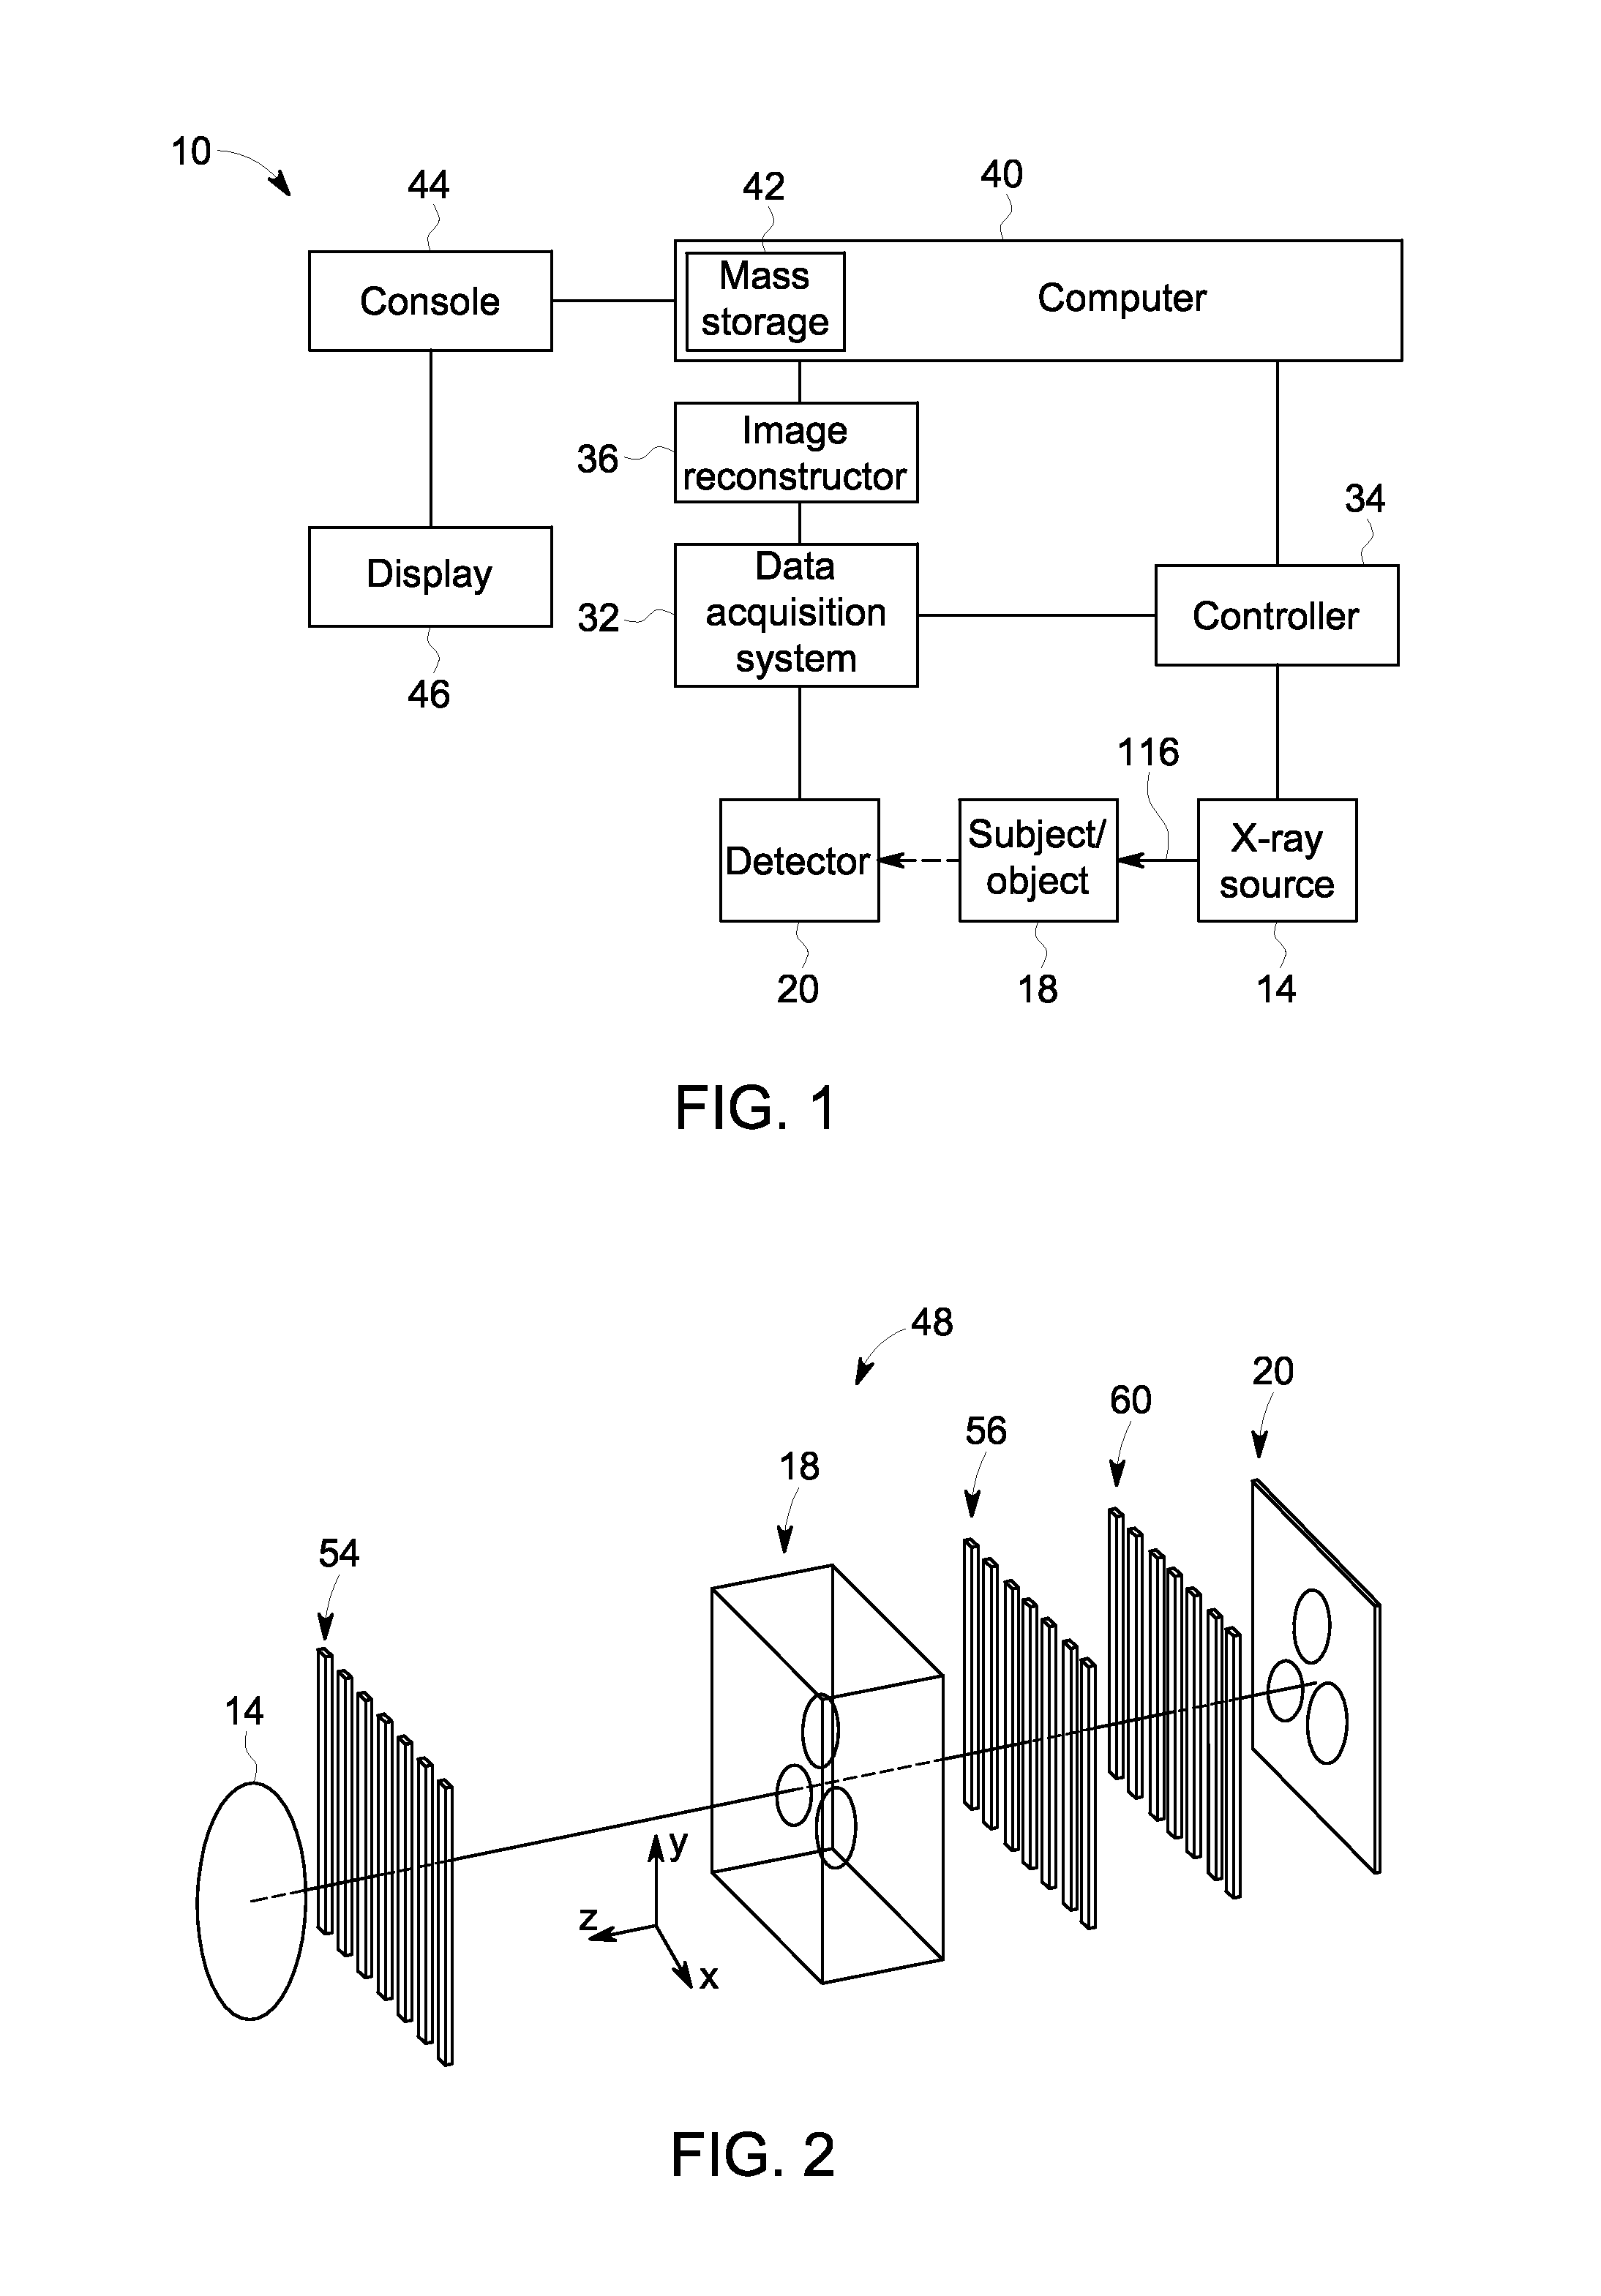 Image reconstruction method for differential phase contrast x-ray imaging